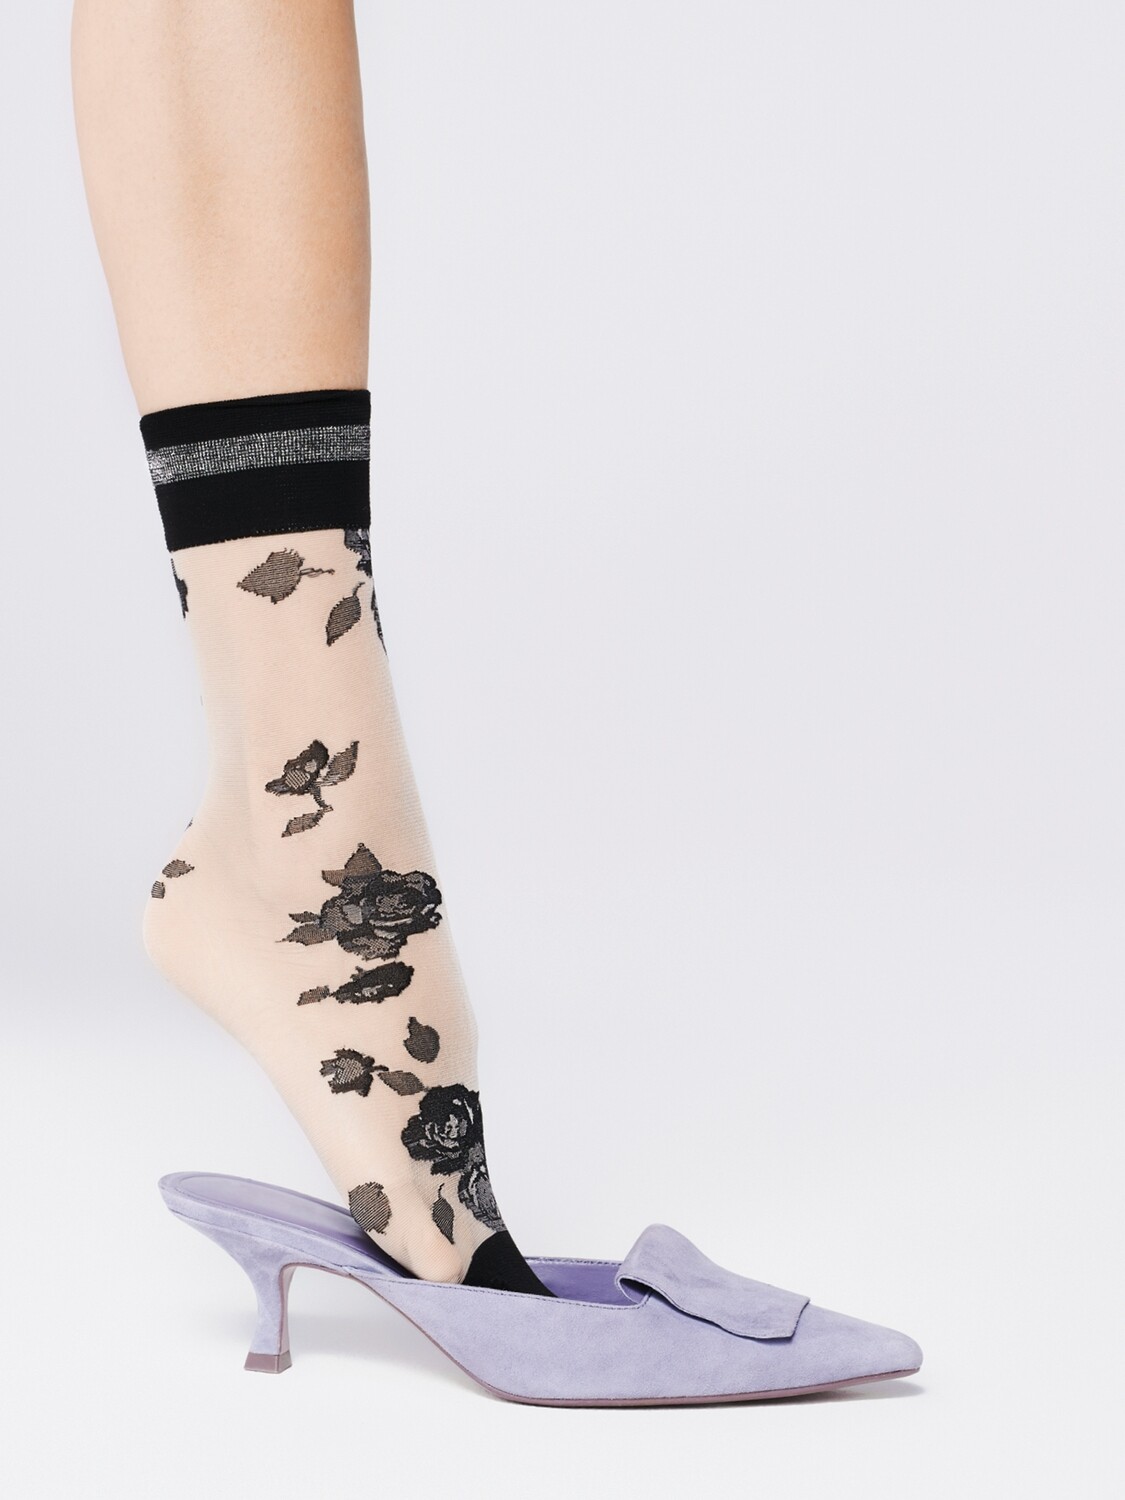 Fiore: Black Rose of Florence Trouser Socks SOLD OUT